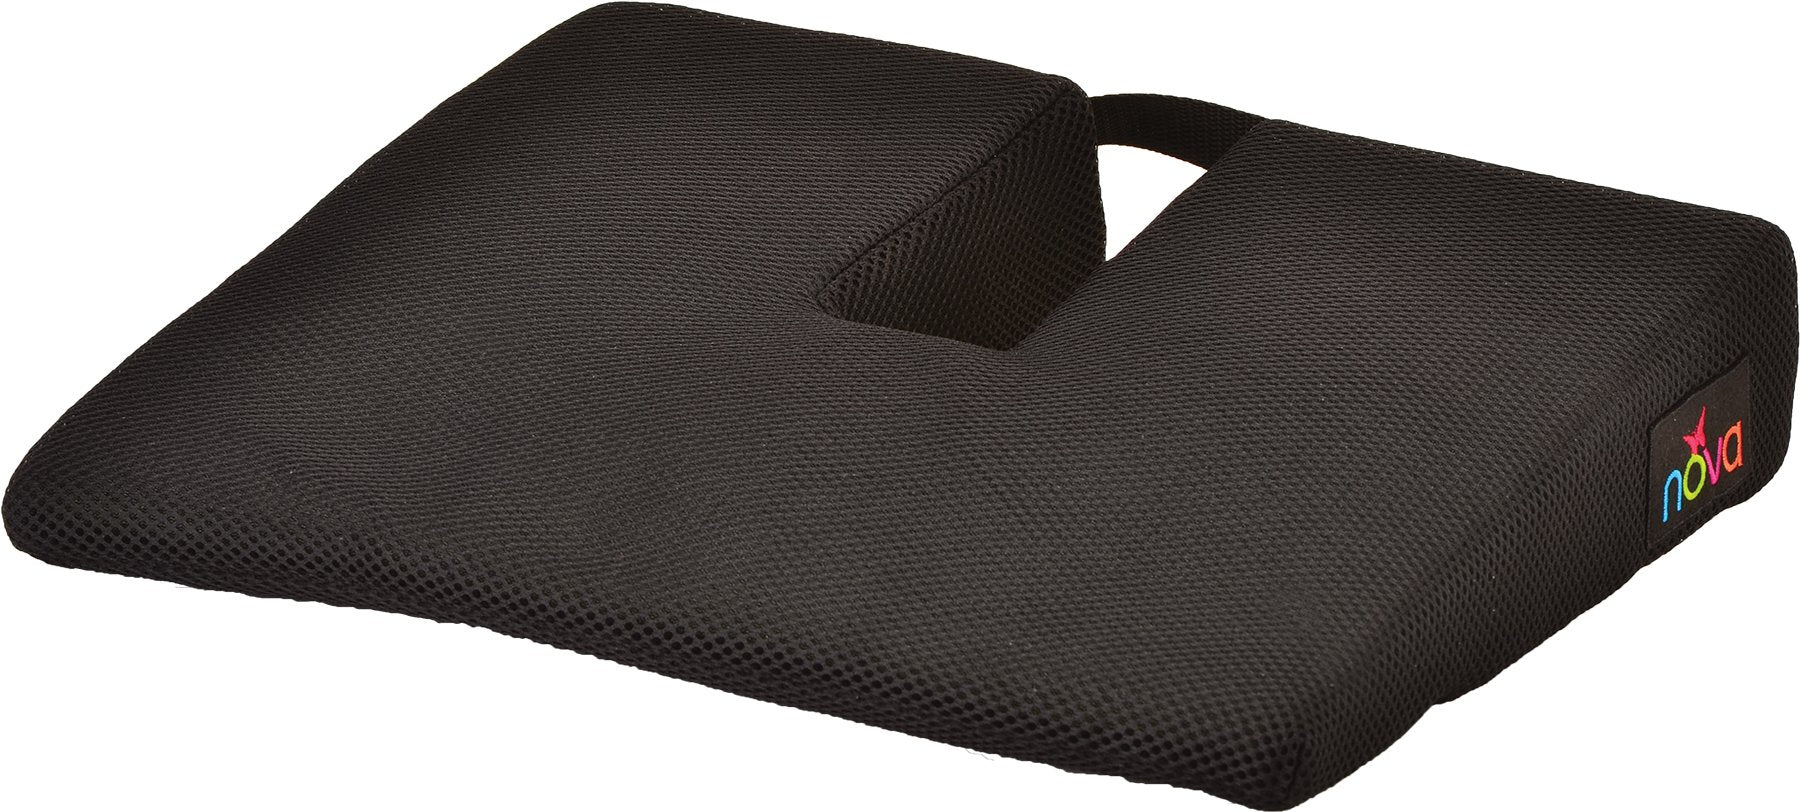 NOVA Medical Products Foam Car Seat Cushion with Removeable, Washable Cover, Black